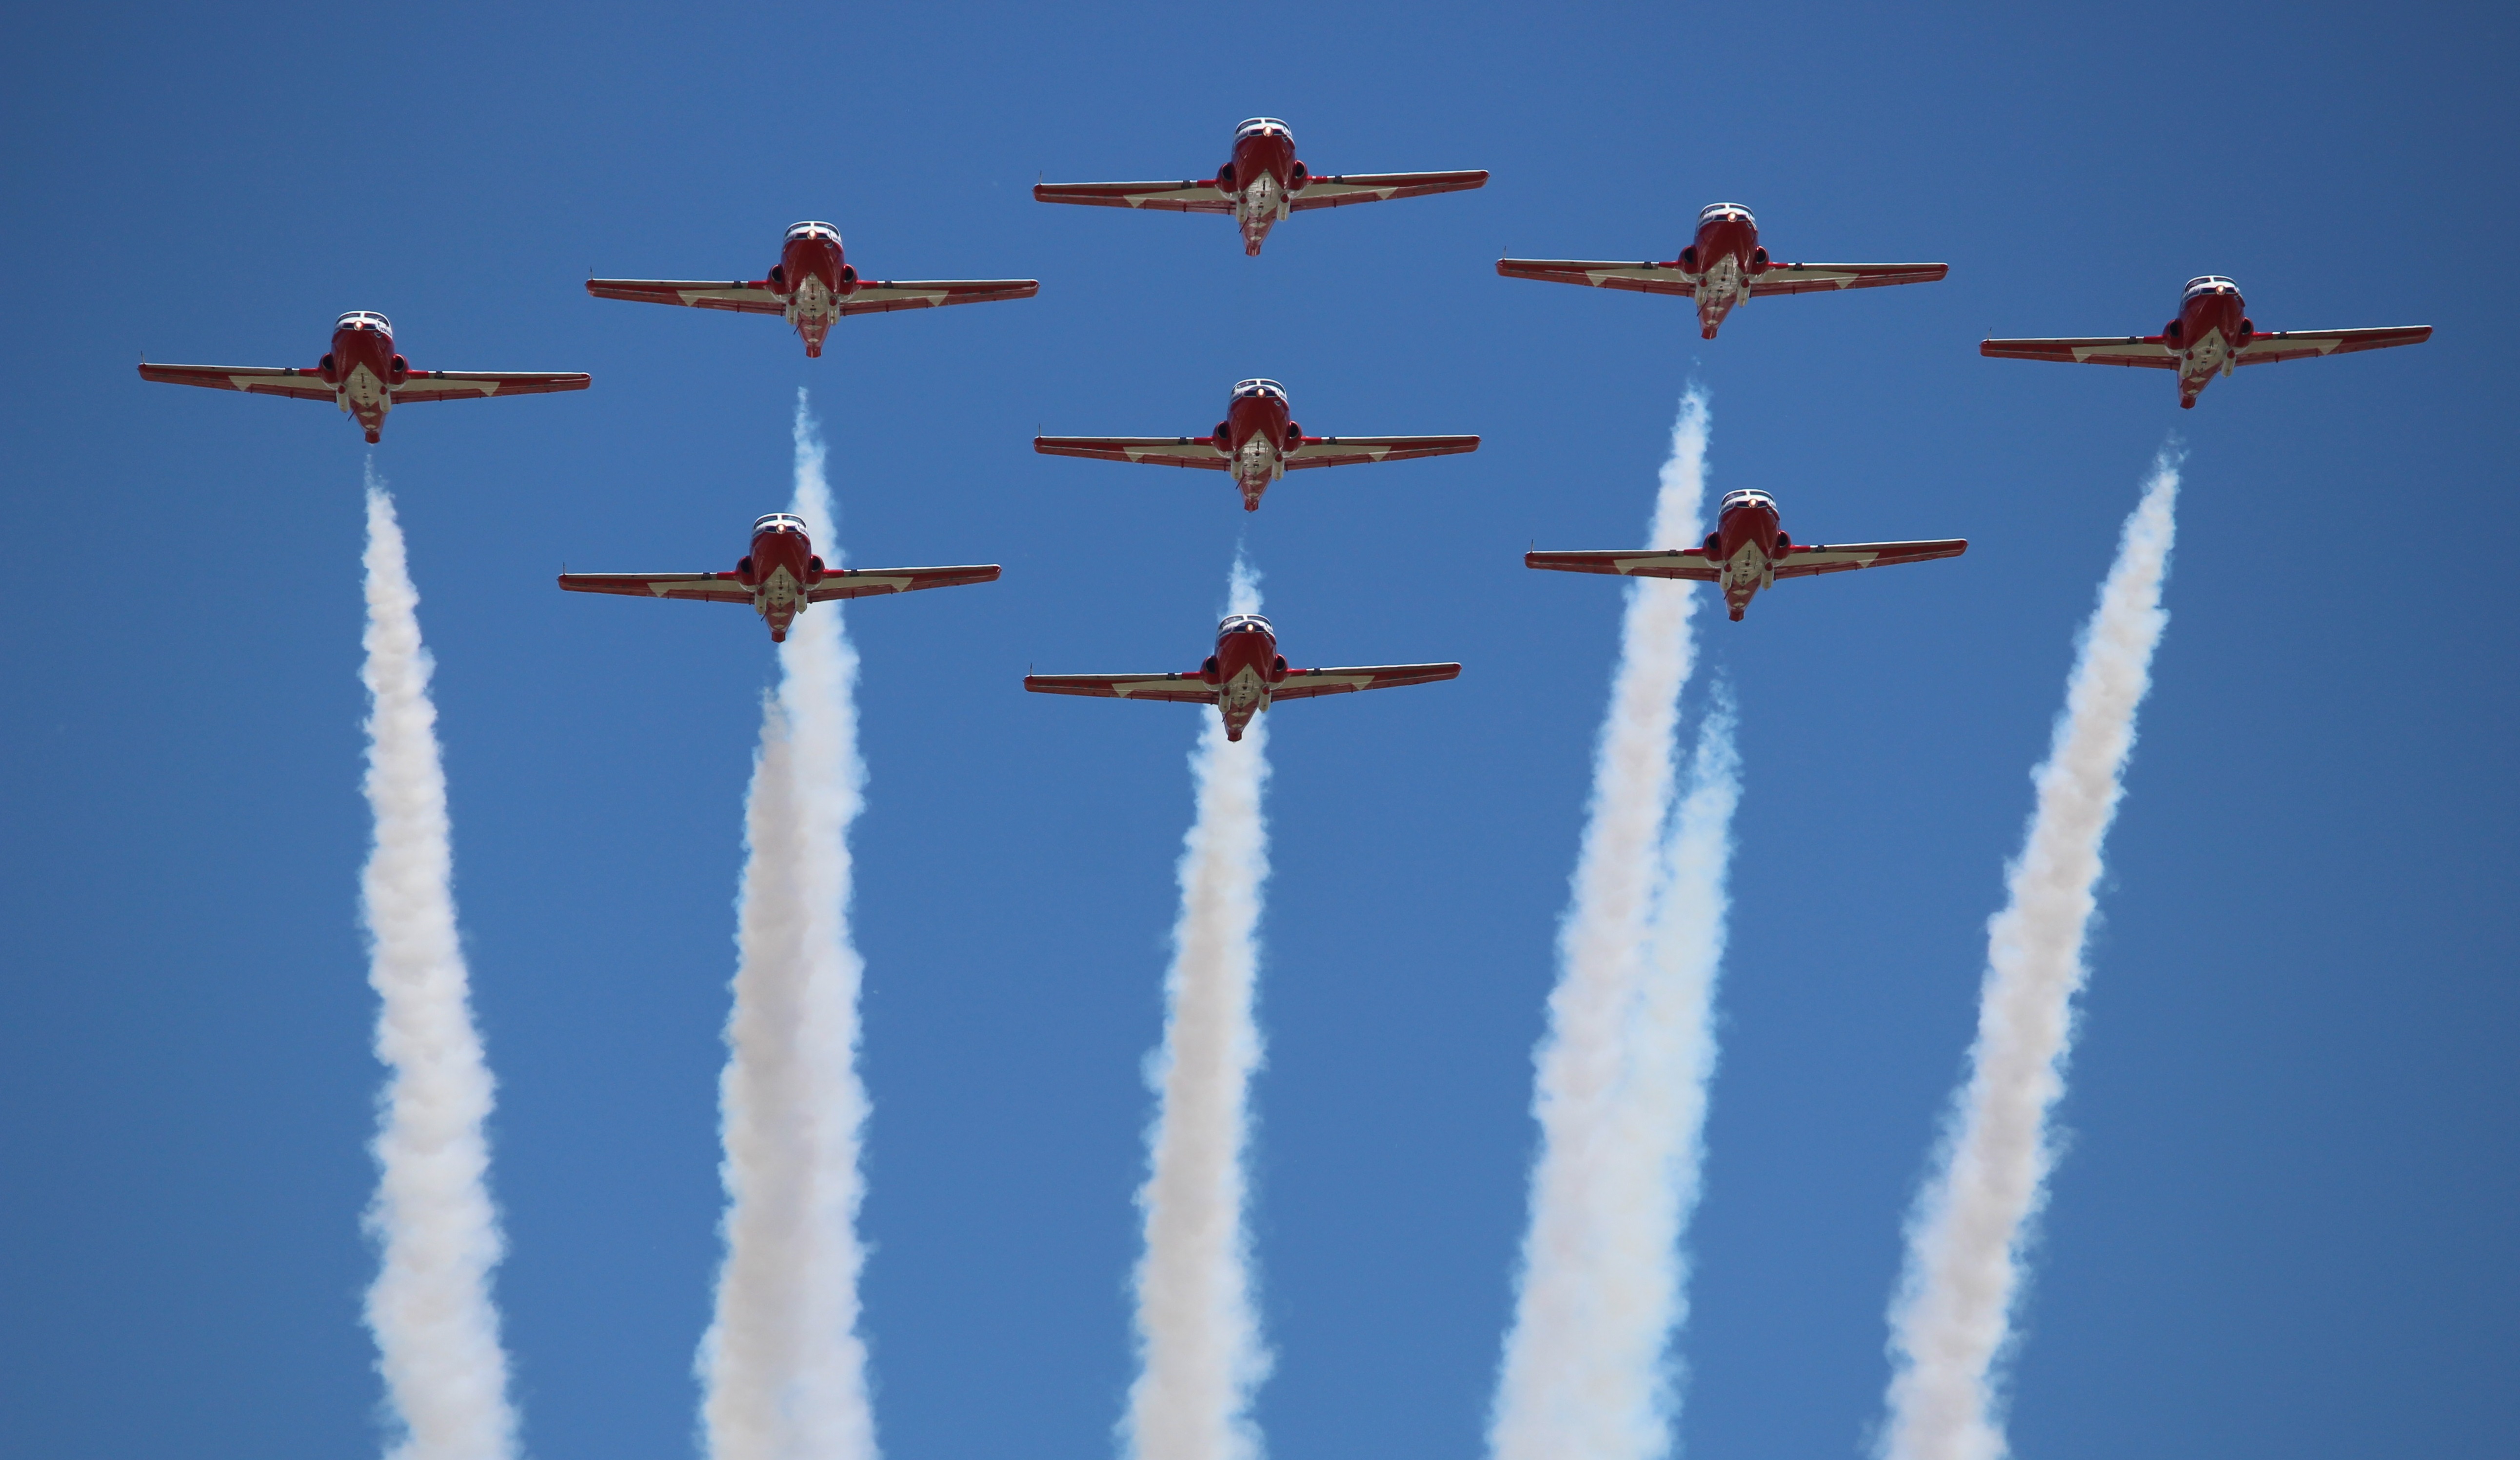 police announce road closures for snowbirds airshow in stratford